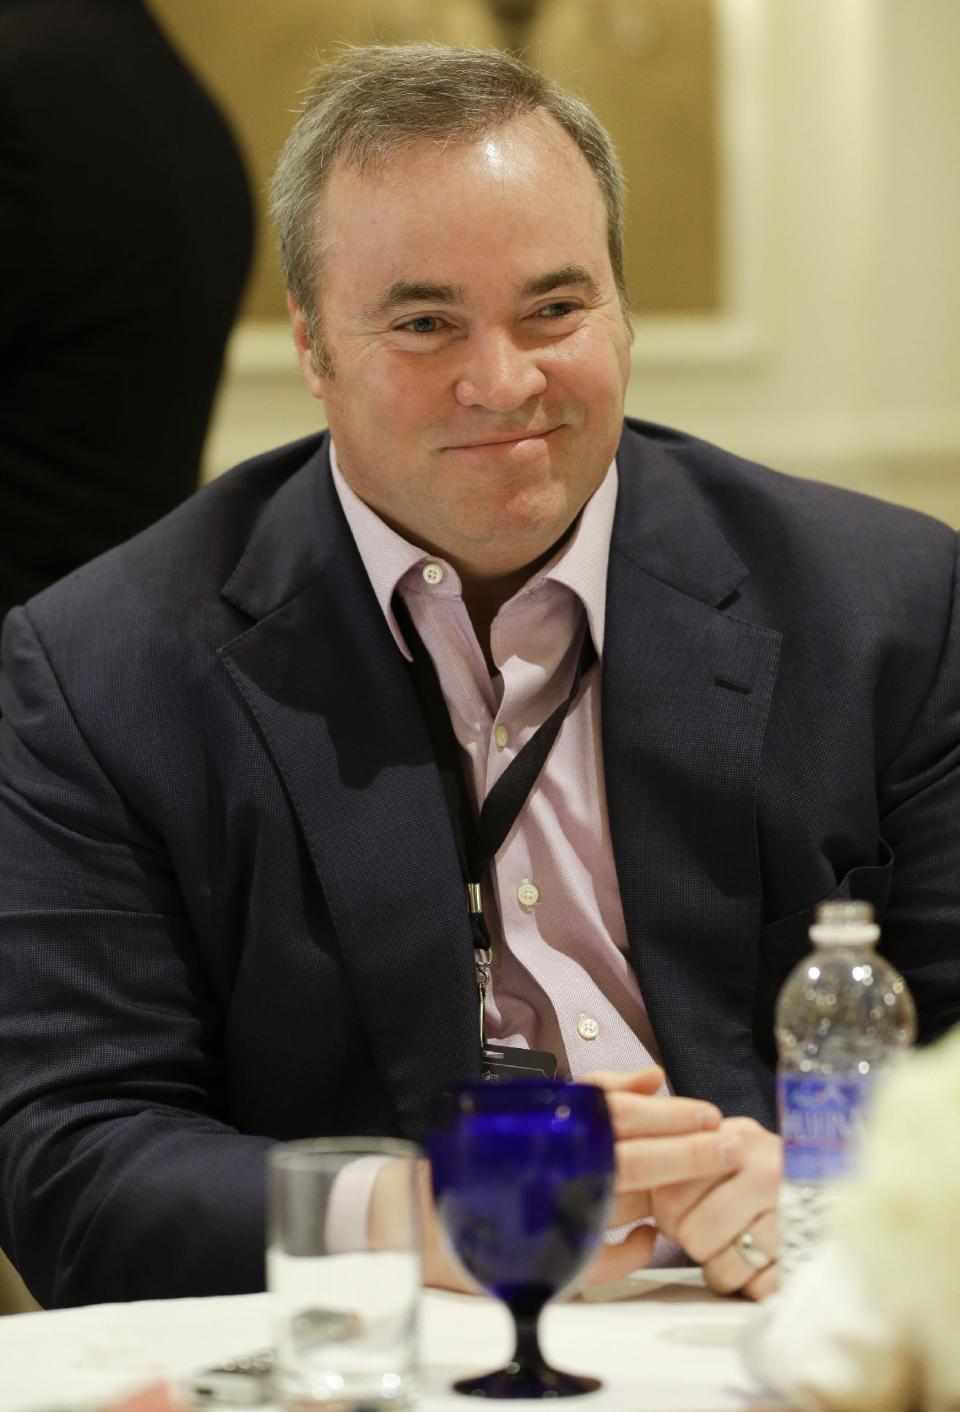 Green Bay Packers head coach Mike McCarthy talks with reporters during the NFC Head Coaches Breakfast at the NFL football meetings in Orlando, Fla., Wednesday, March 26, 2014. (AP Photo/John Raoux)